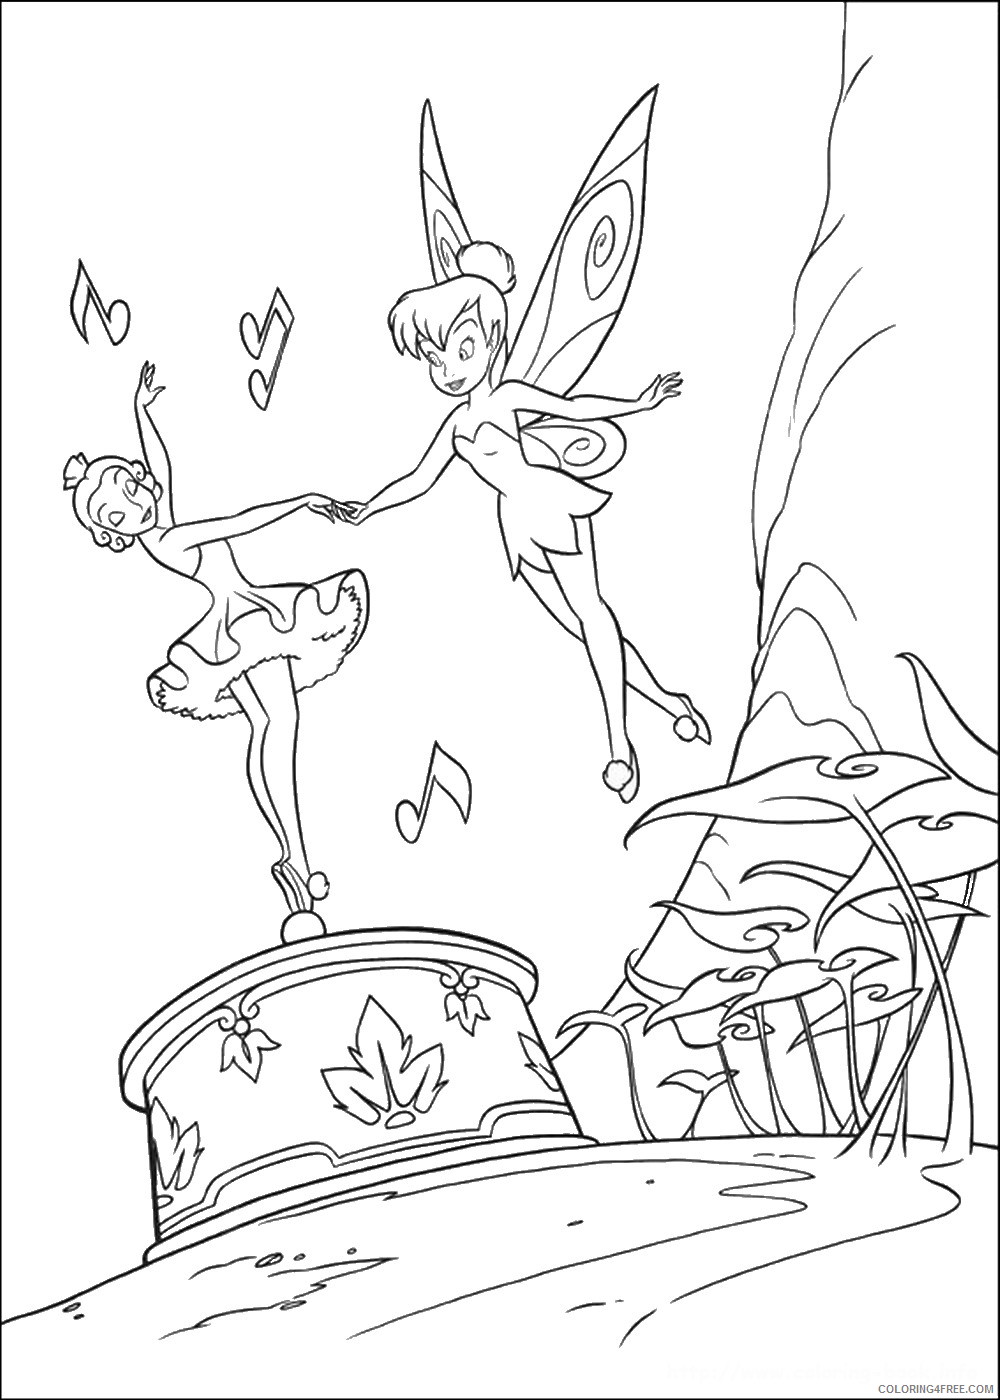 Tinker Bell Coloring Pages Cartoons tinkerbell_cl_04 Printable 2020 6611 Coloring4free